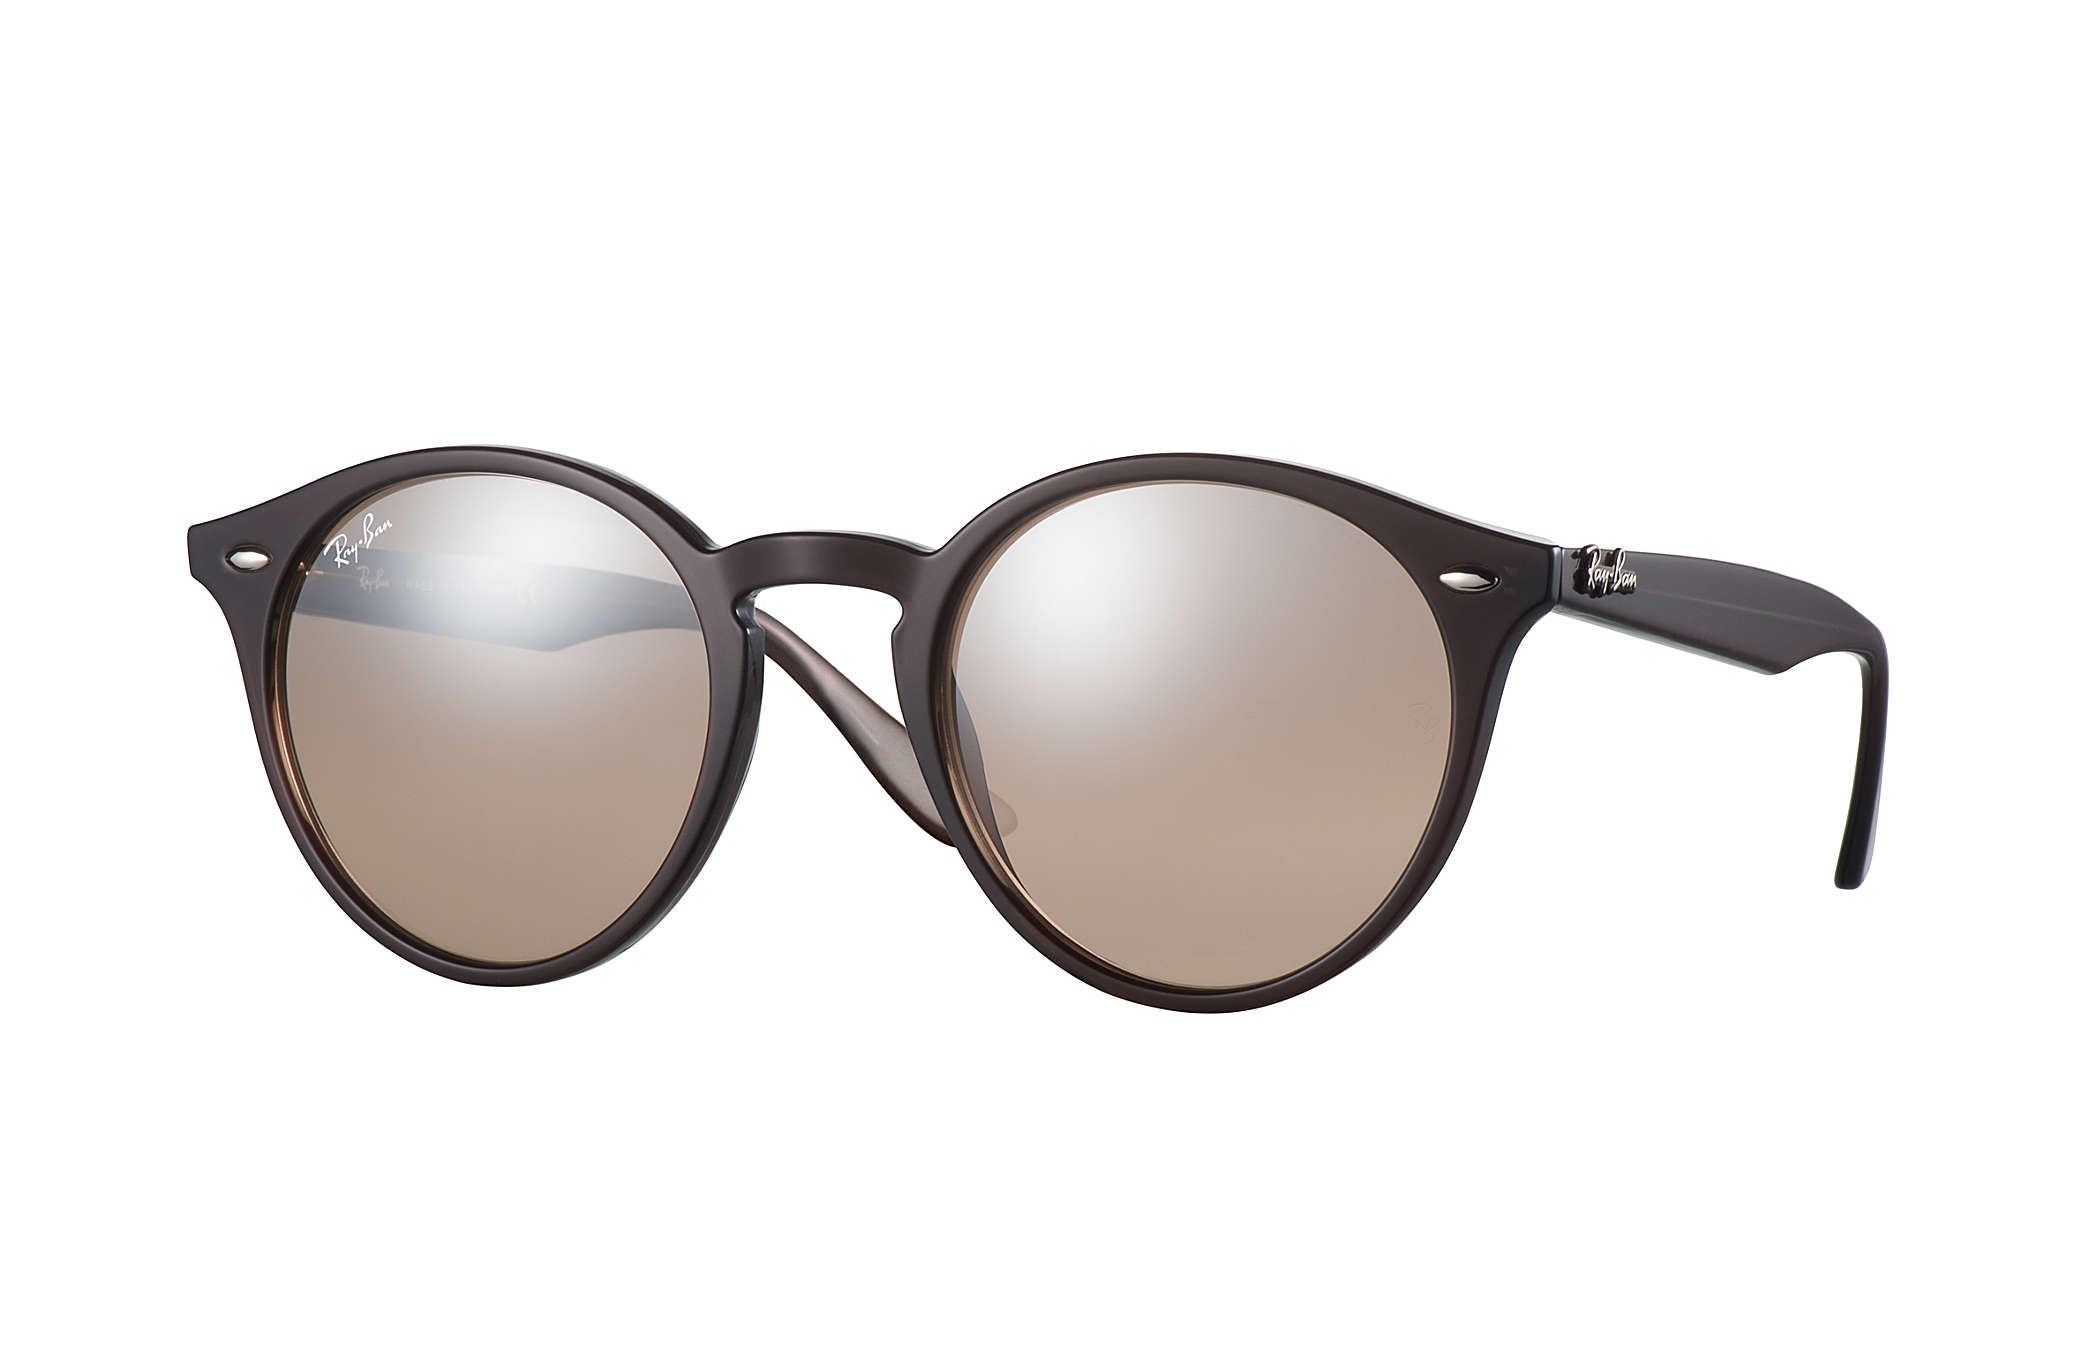 Ray Ban Opal Sunglasses Brown BrownMirrorSilver Round